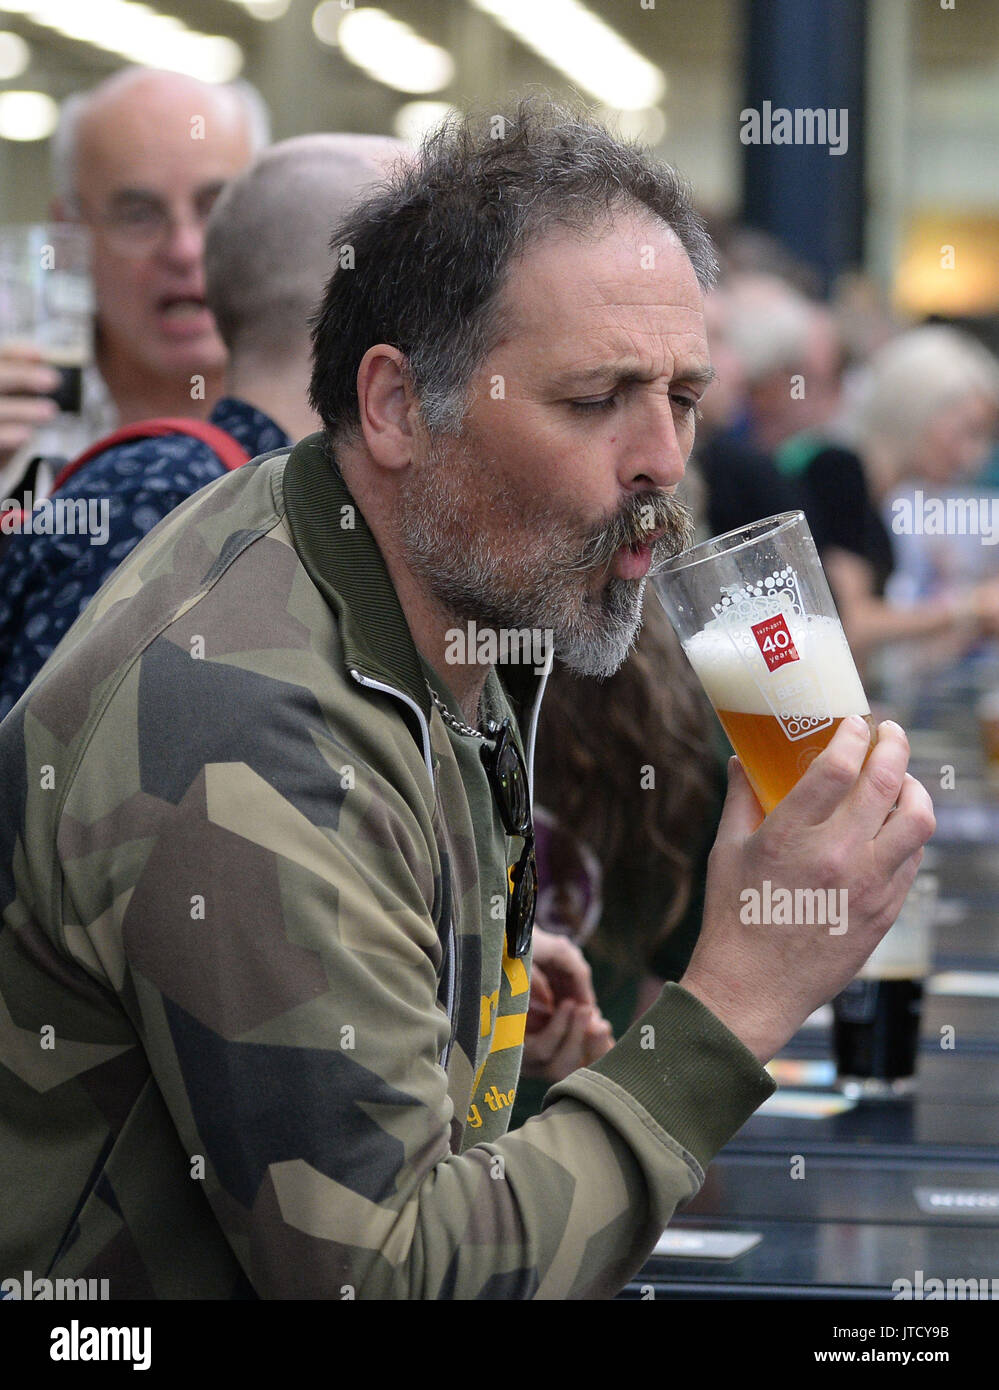 A visitor sizes up his drink at the Great British Beer Festival 2017 at Olympia in London. The festival, which is organised by the Campaign for Real Ale (CAMRA), is celebrating its 40th anniversary. Stock Photo